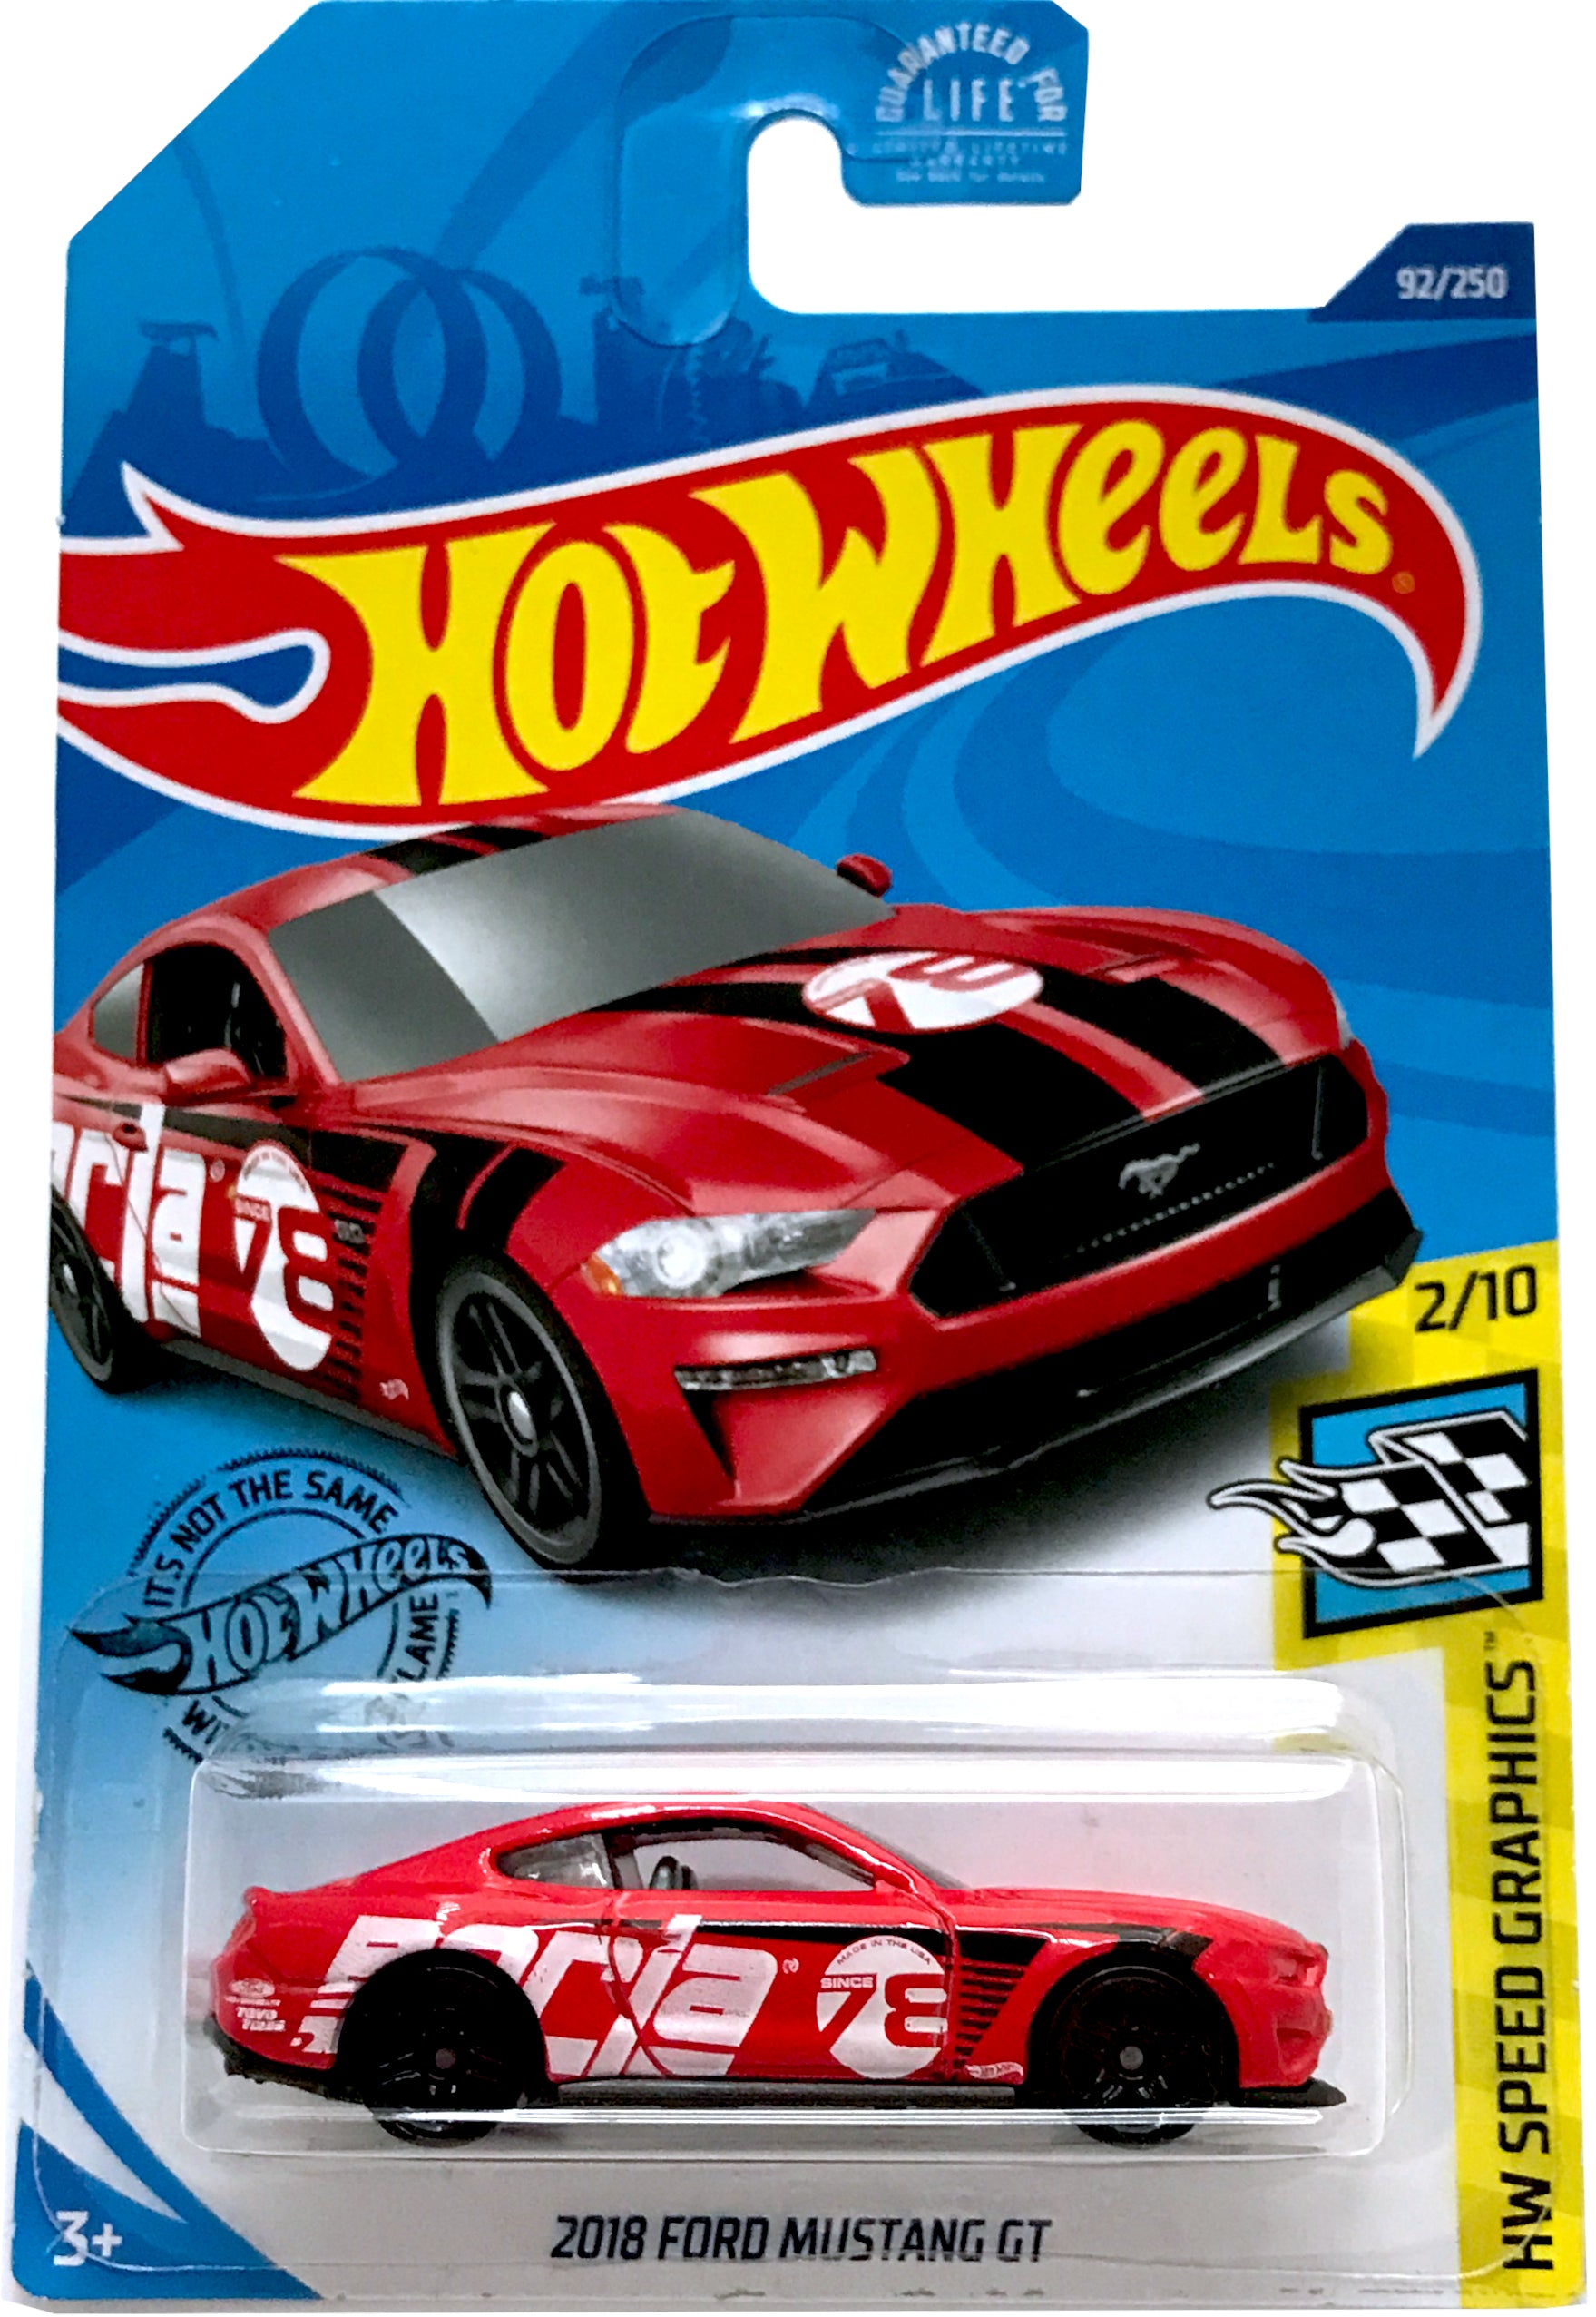 2020 Hot Wheels Mainline #092 - 2018 Ford Mustang GT (Red) GHC84